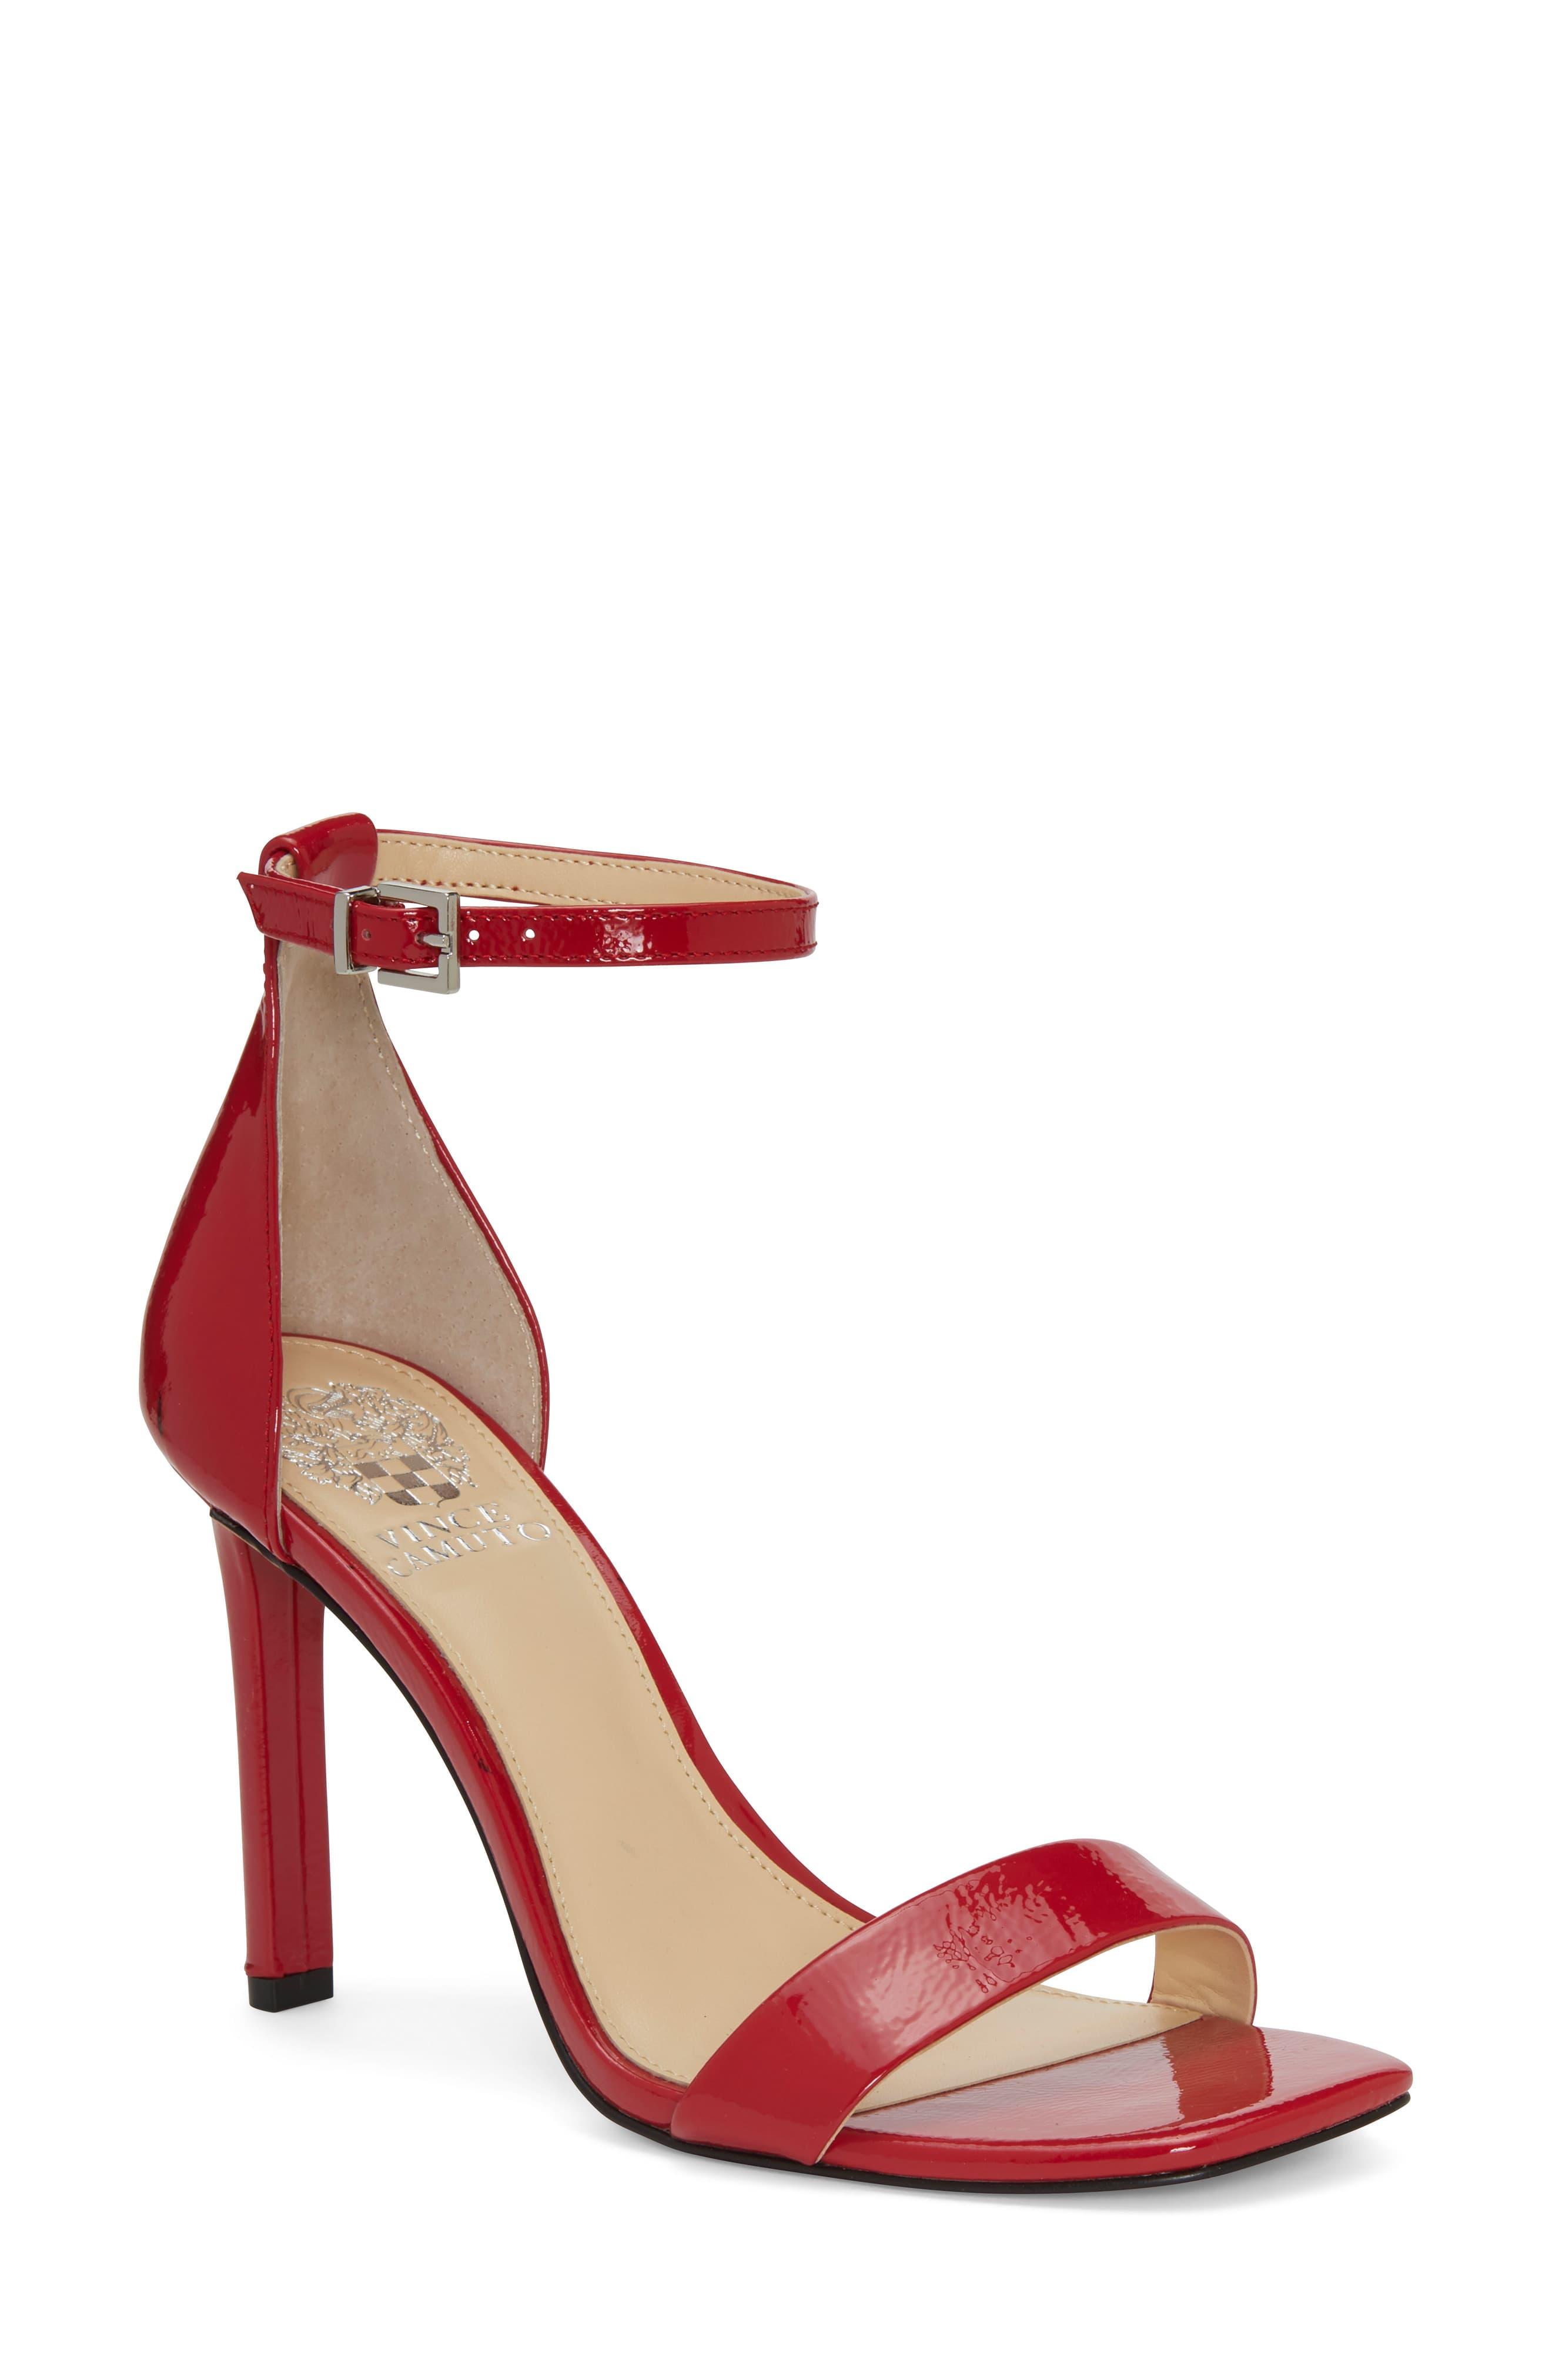 Vince Camuto Lauralie Ankle Strap Sandal in Red - Save 60% - Lyst